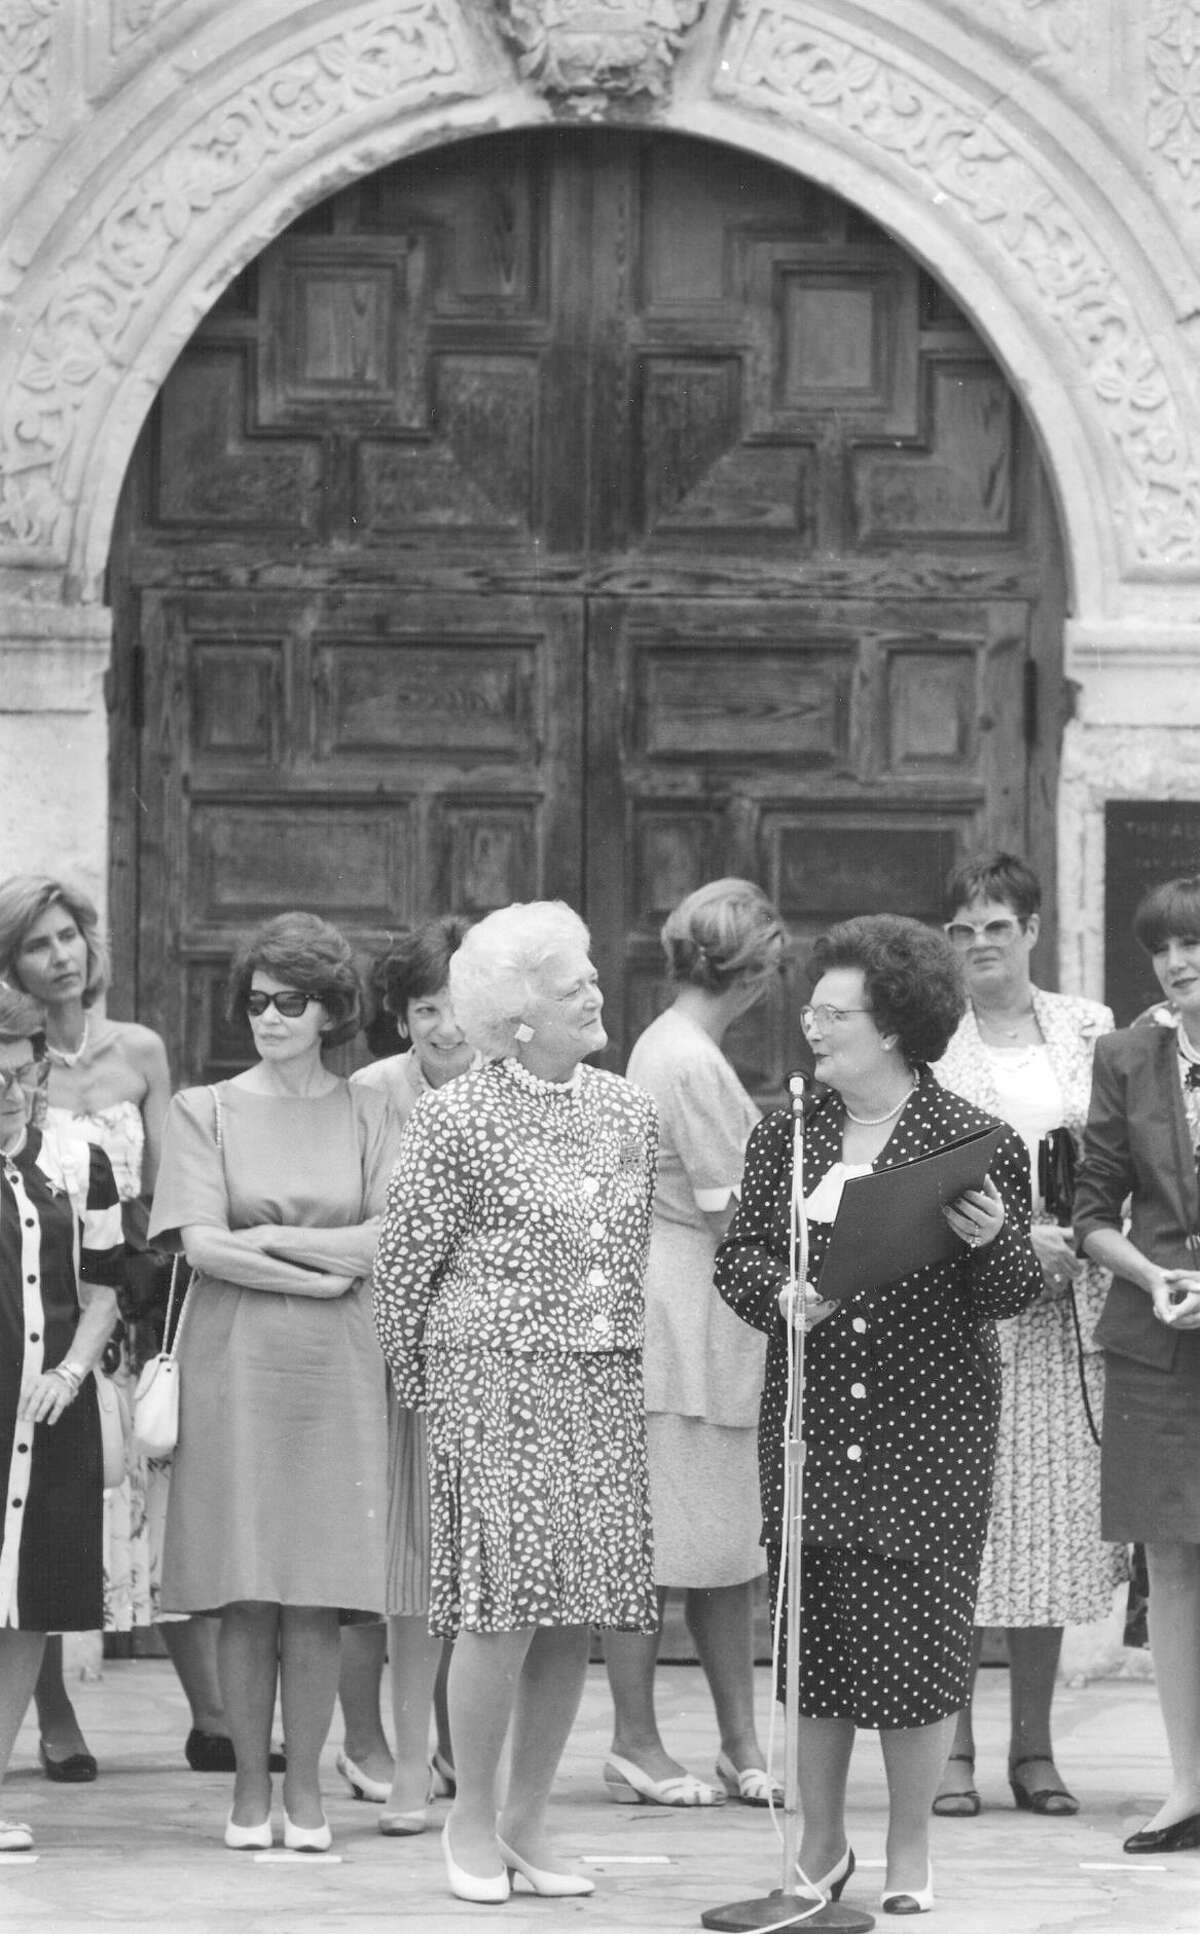 San Antonio Mayor Lila Cockrell makes a proclamation to First Lady Barbara Bush in front of the Alamo on July 10, 1990, as part of the Economic Summit visit. San Antonio Express-News file photo